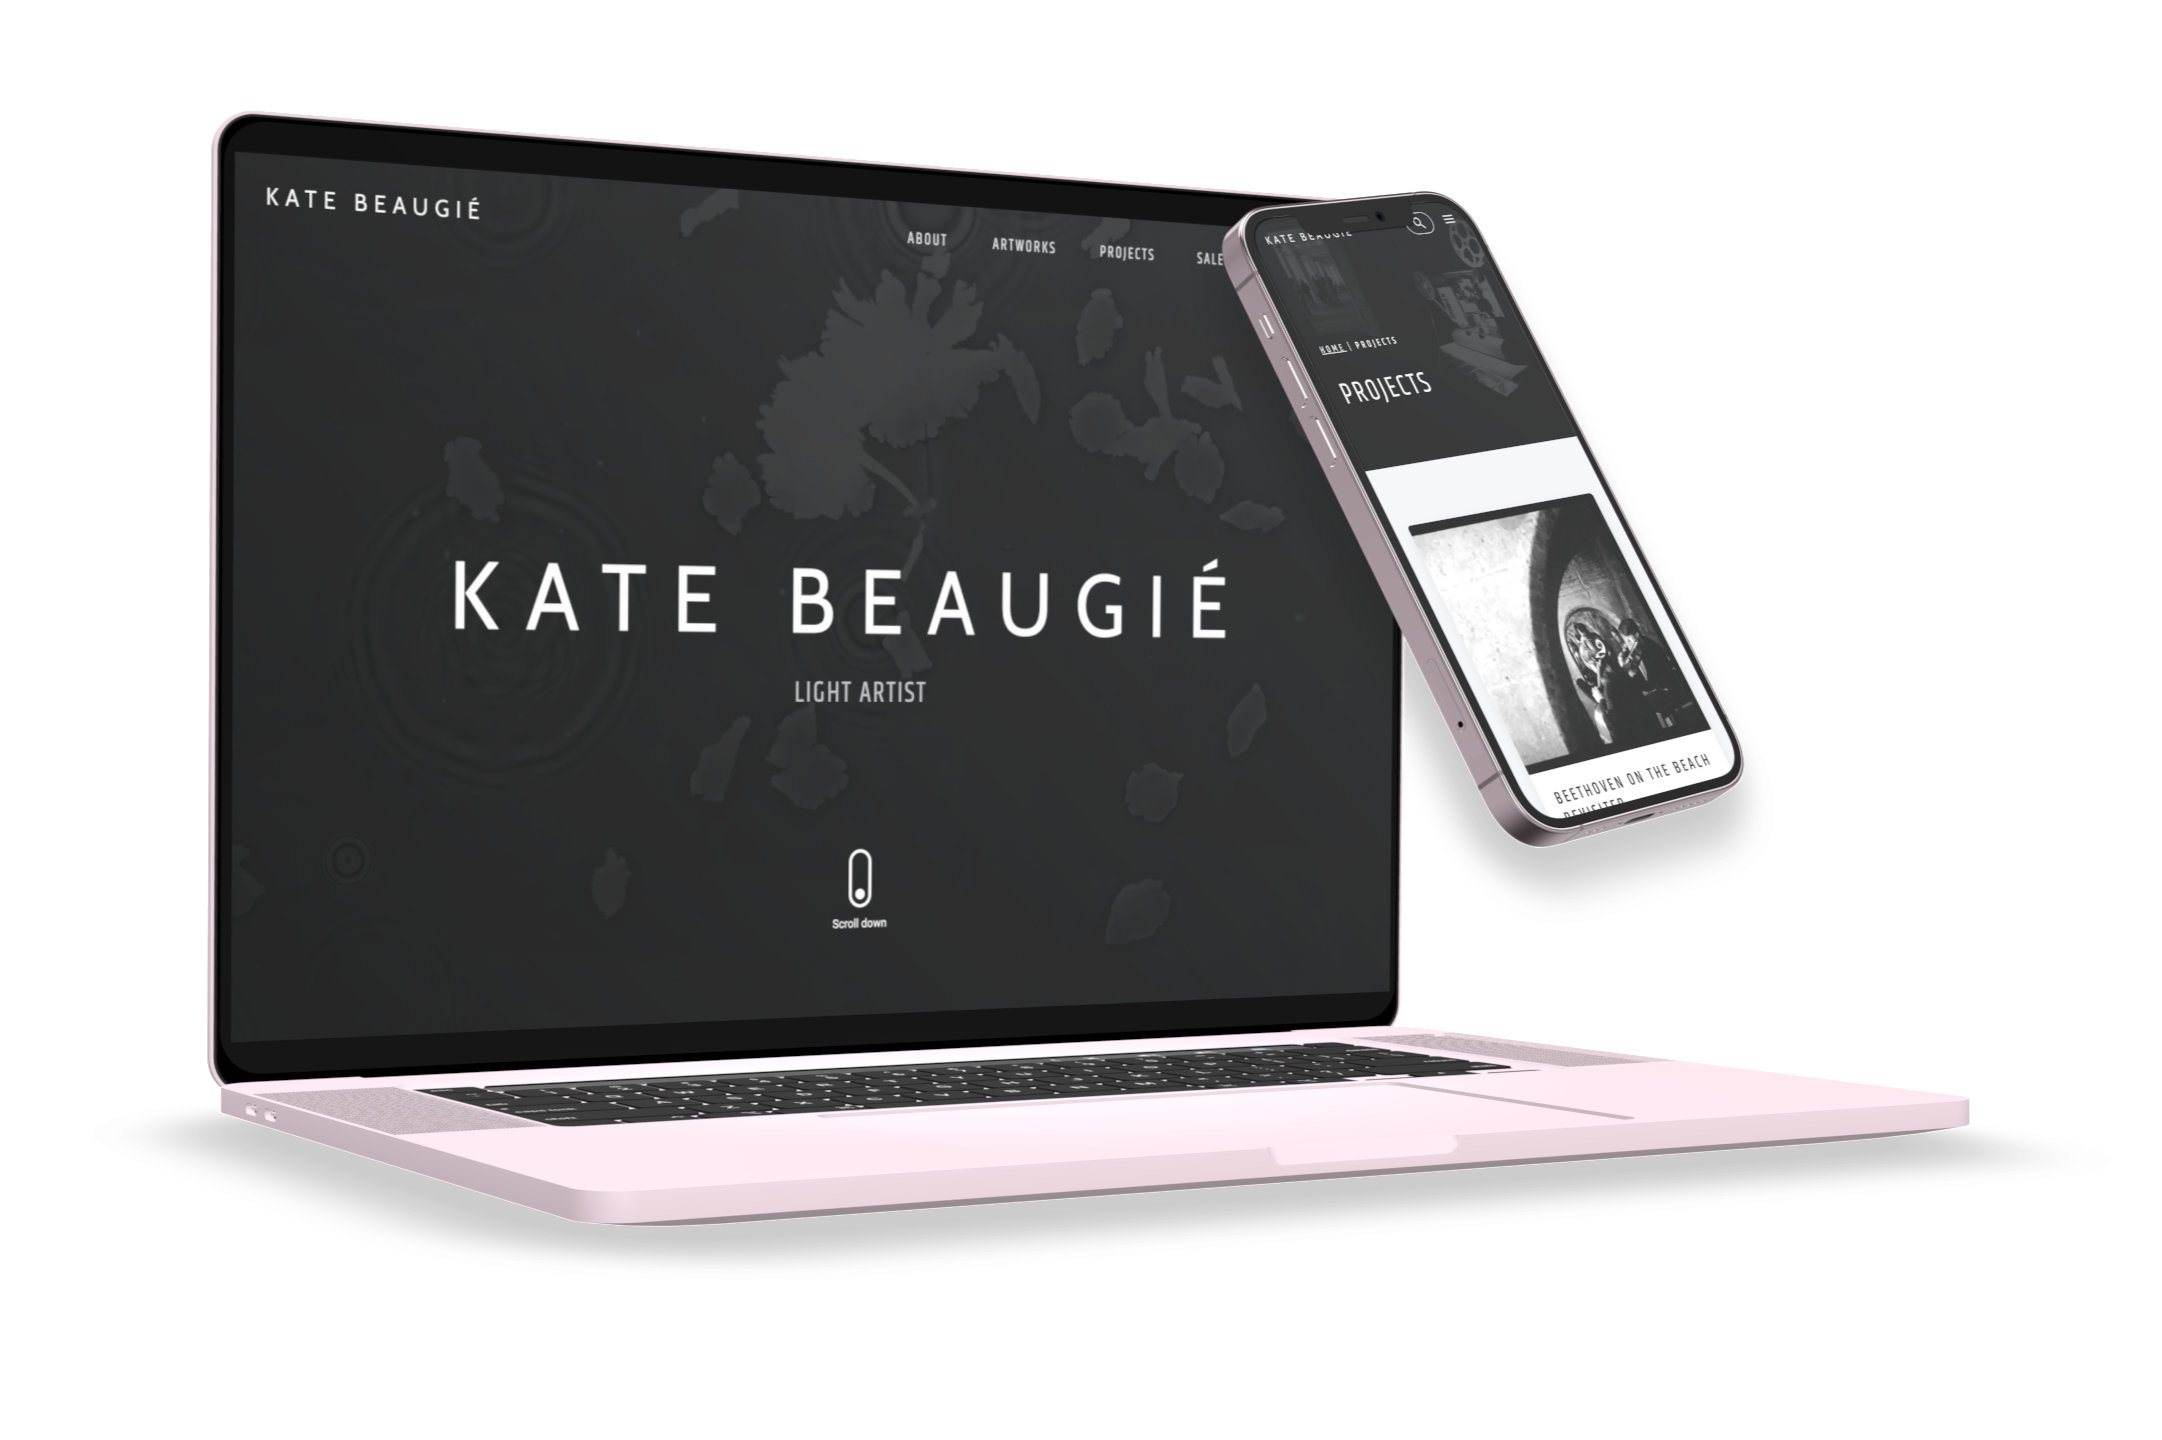 Kate Beaugié website home page displayed on laptop and mobile devices